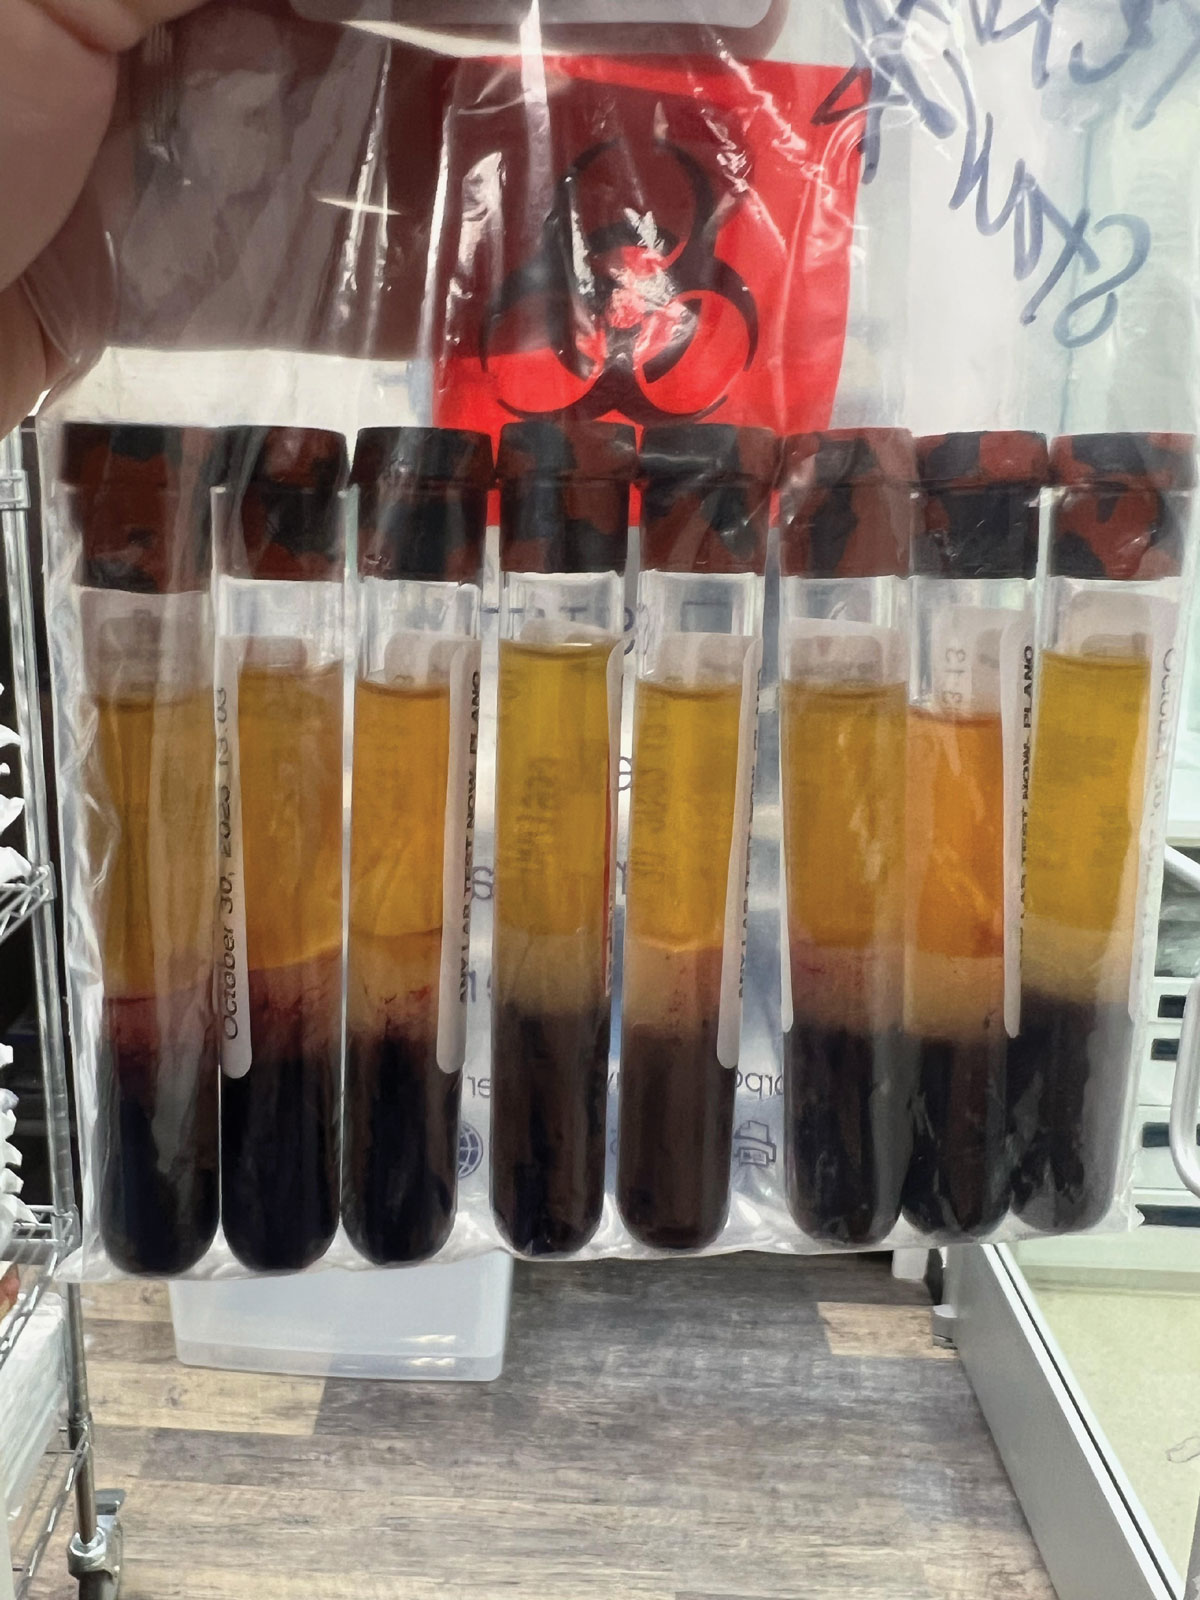 Typical batch of tiger tubes showcasing natural variation in color. Tubes are examined under a bright light to ensure quality of serum. Some tubes may not be used due to the visible presence of red blood cells in the serum layer (second tube from the right).